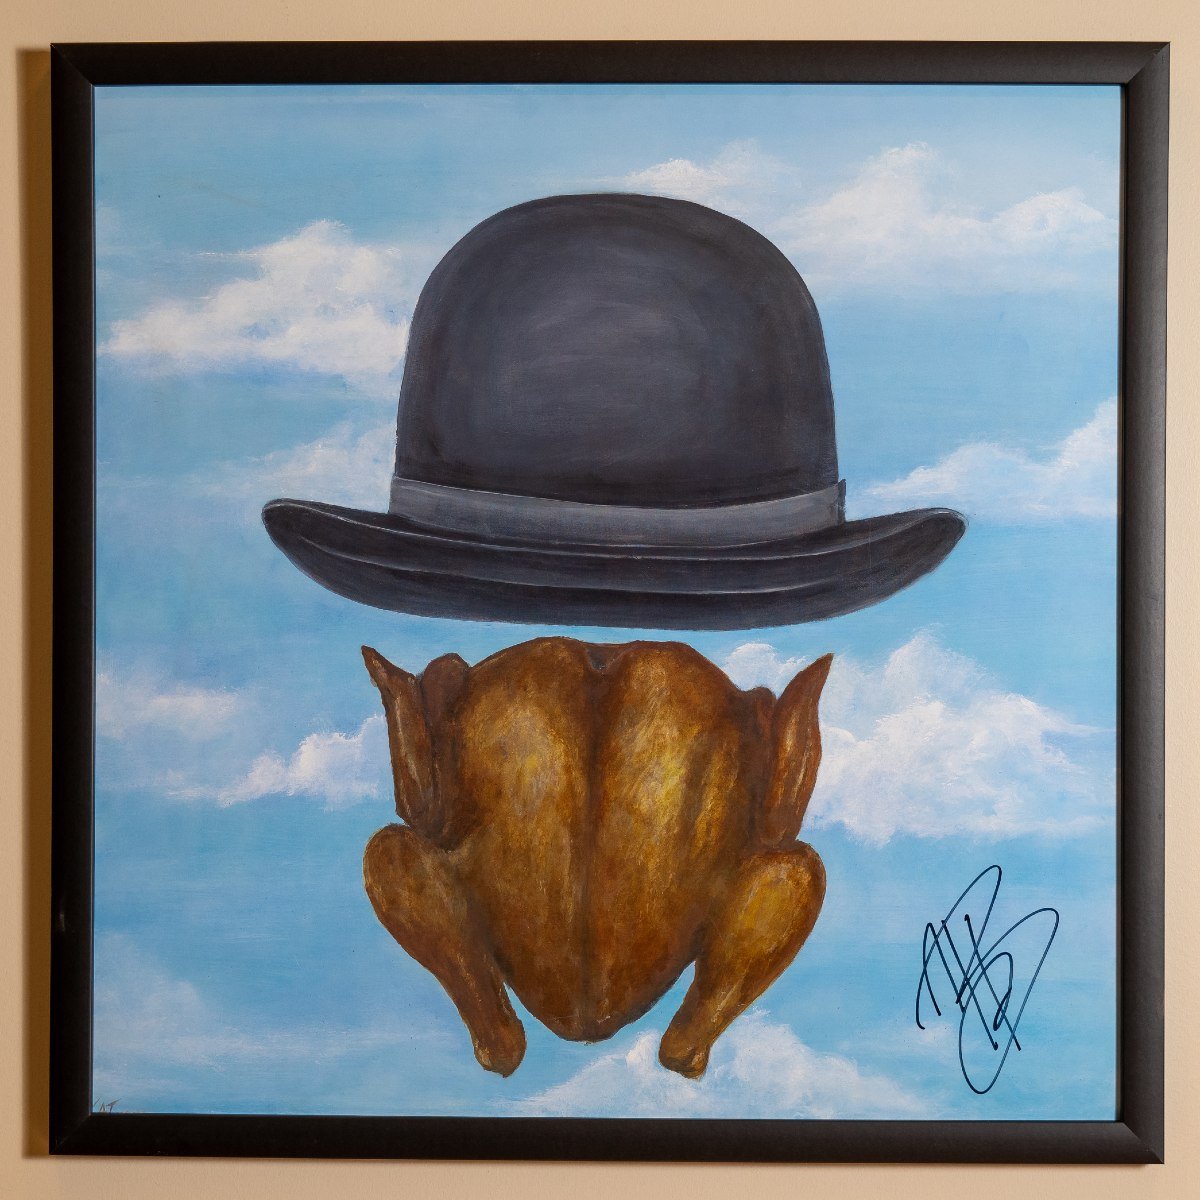 Alton Brown Signed Chicken with Bowler Poster Framed